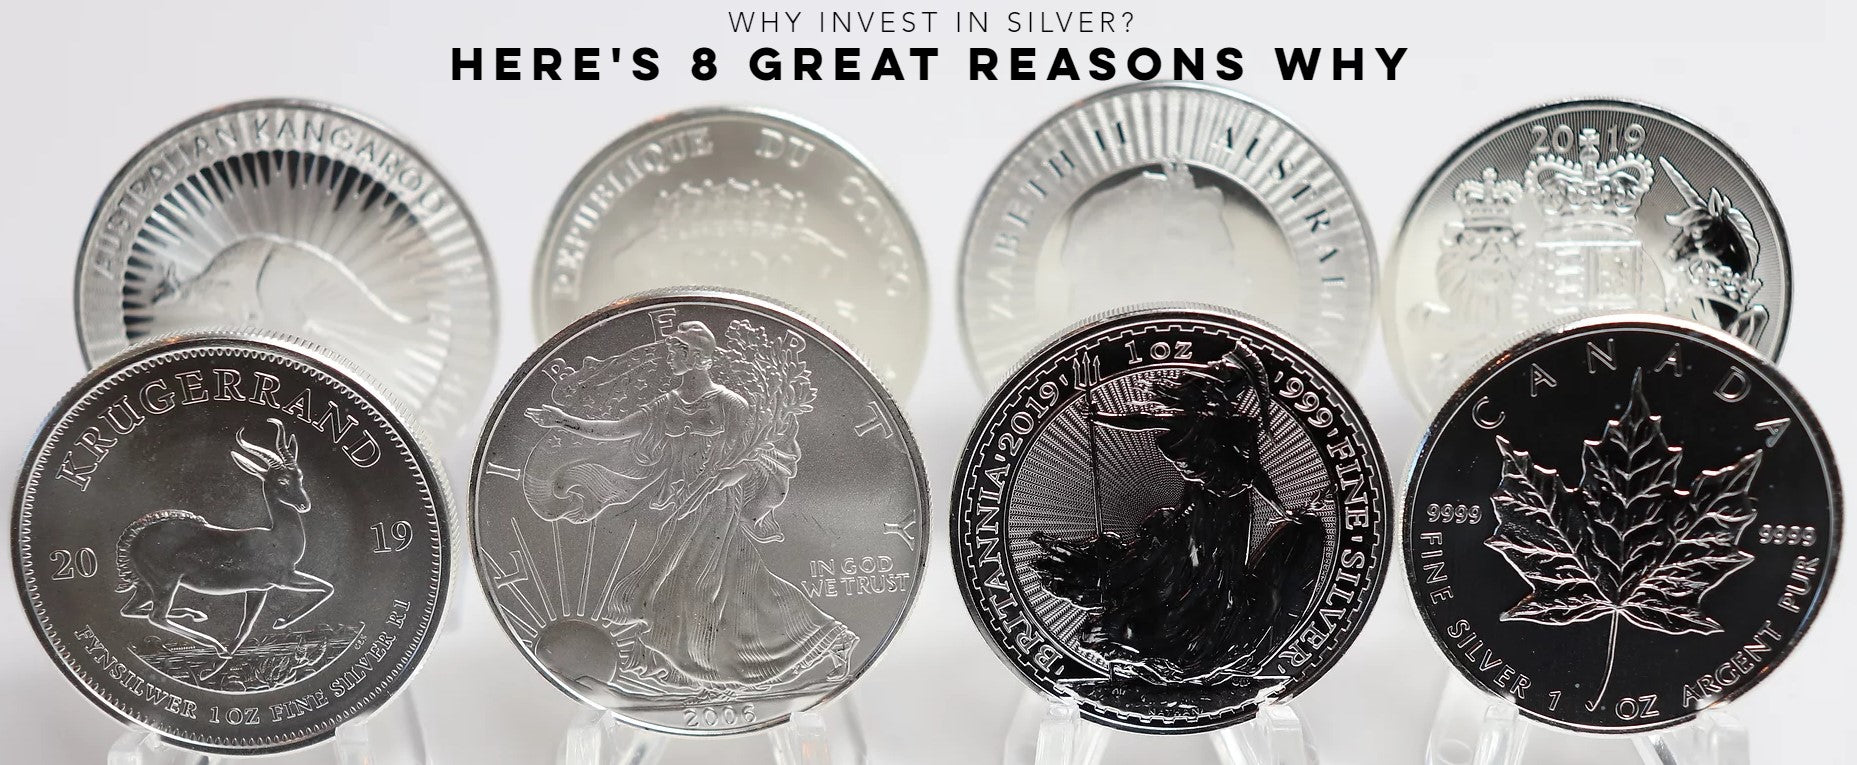 Why Invest in Silver? Here's 8 Great Reasons